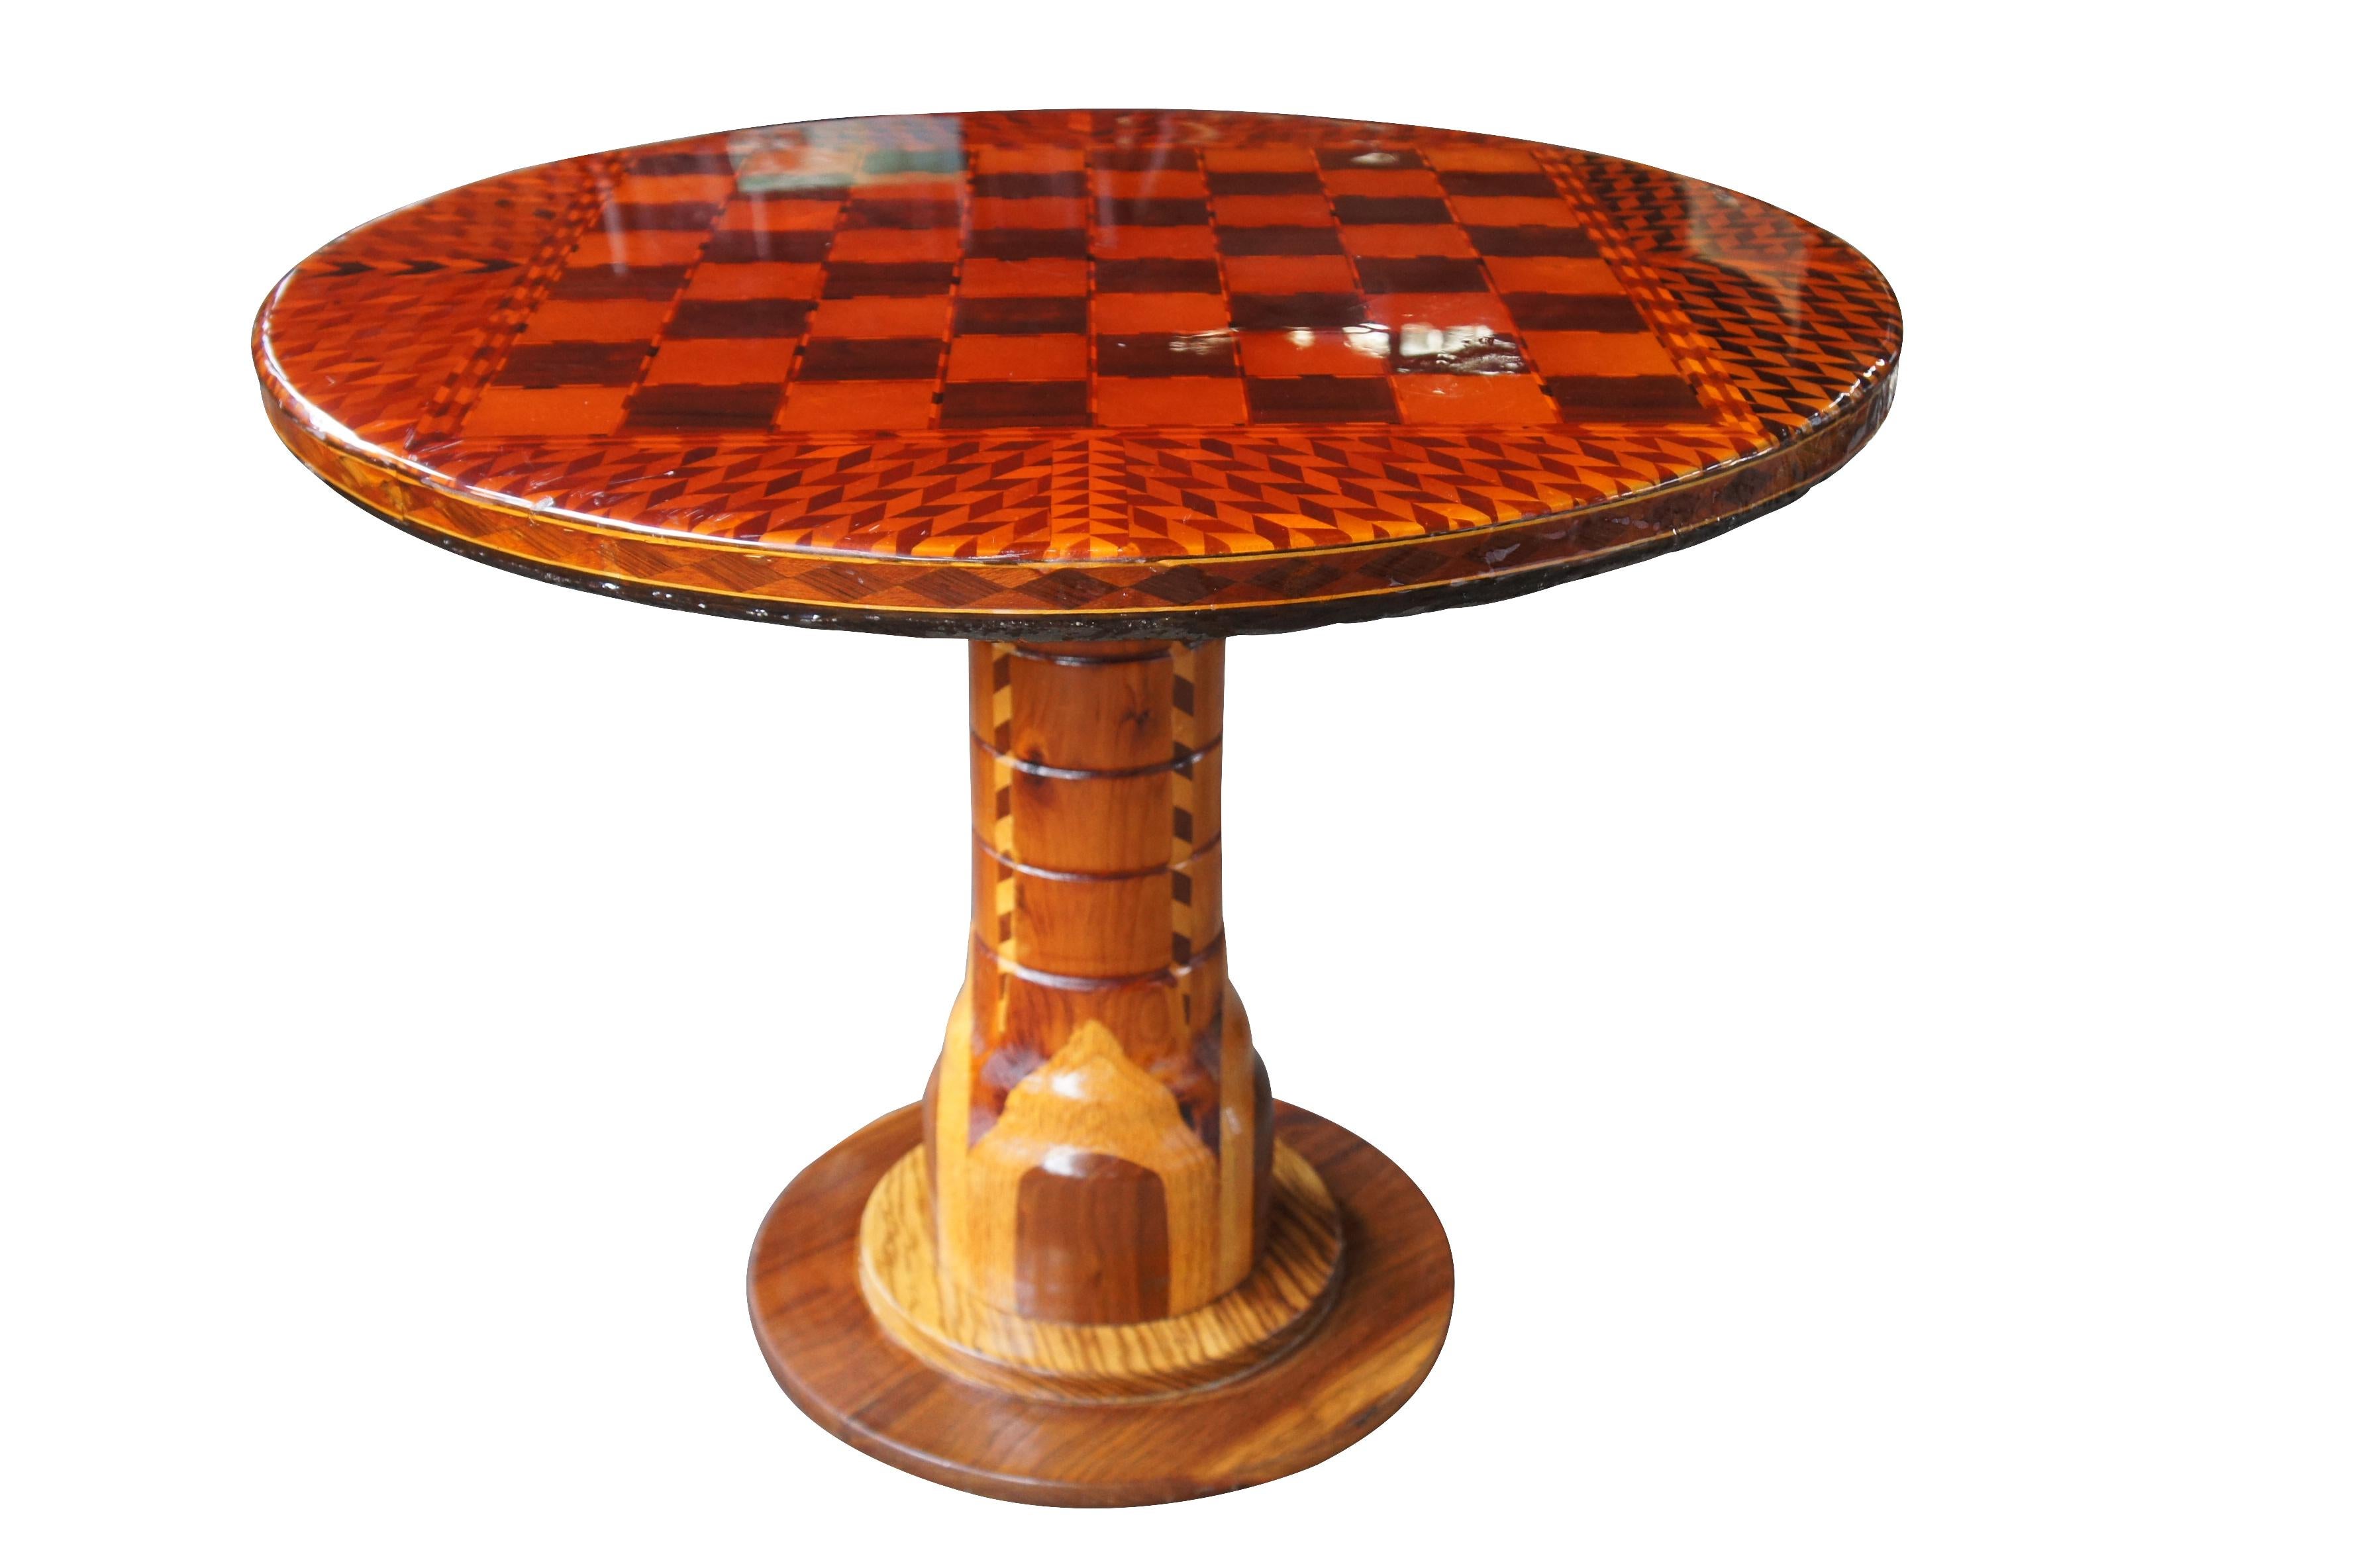 Italian Arts & Crafts chess checkers side end accent game table round parquetry

Vintage Italian Arts & Crafts game table

Features exotic inlaid wood design with pedestal base.
Was most likely purchased years back in Sorrento Italy, where many